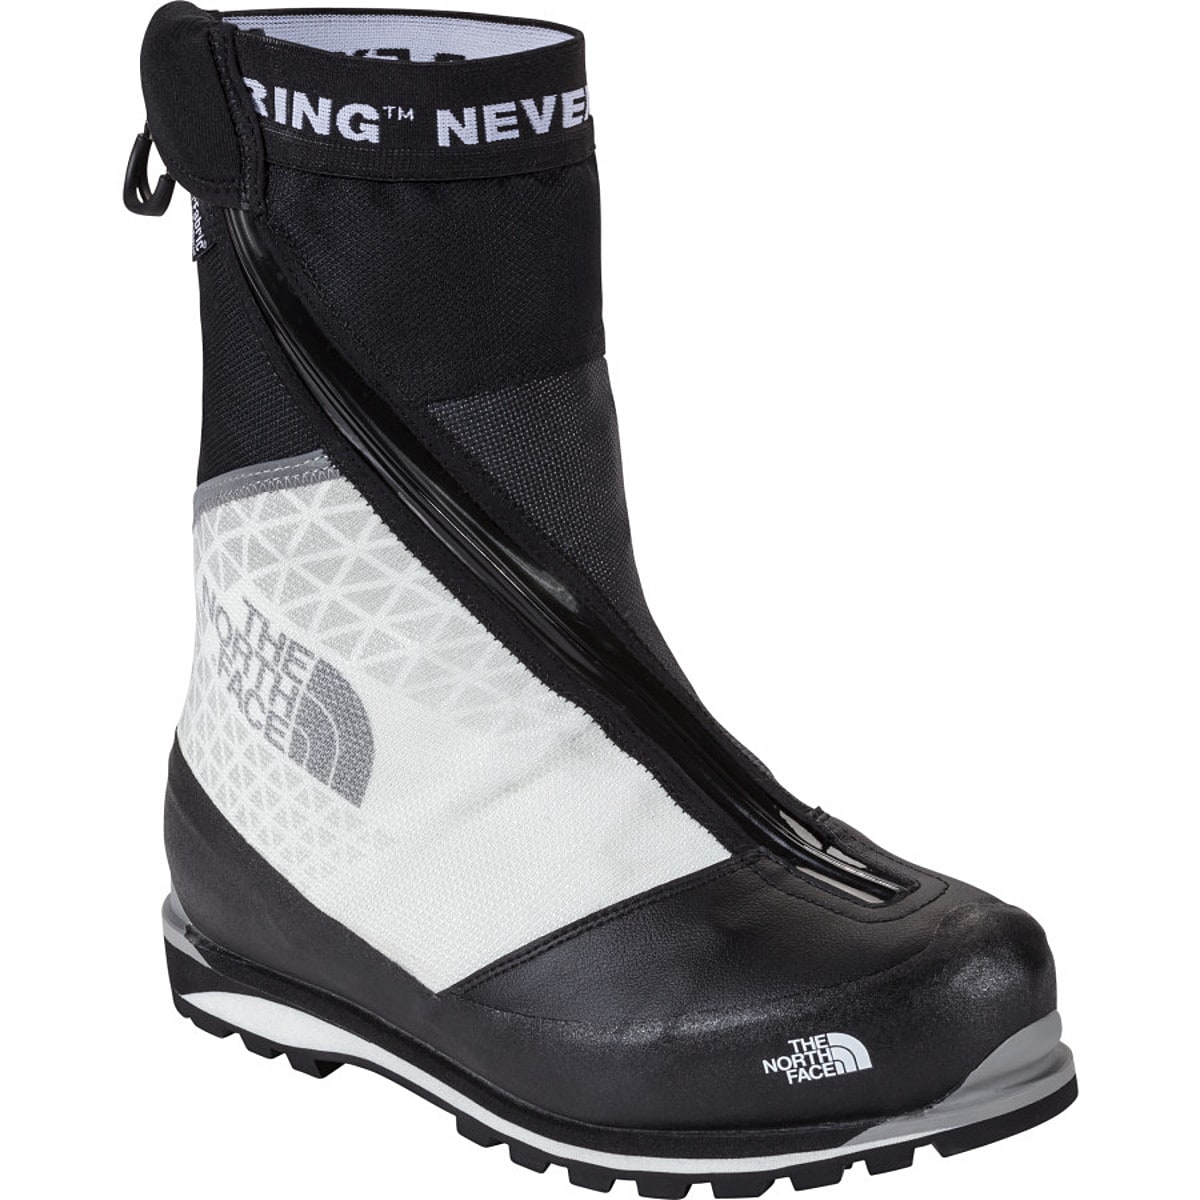 north face summit series boots